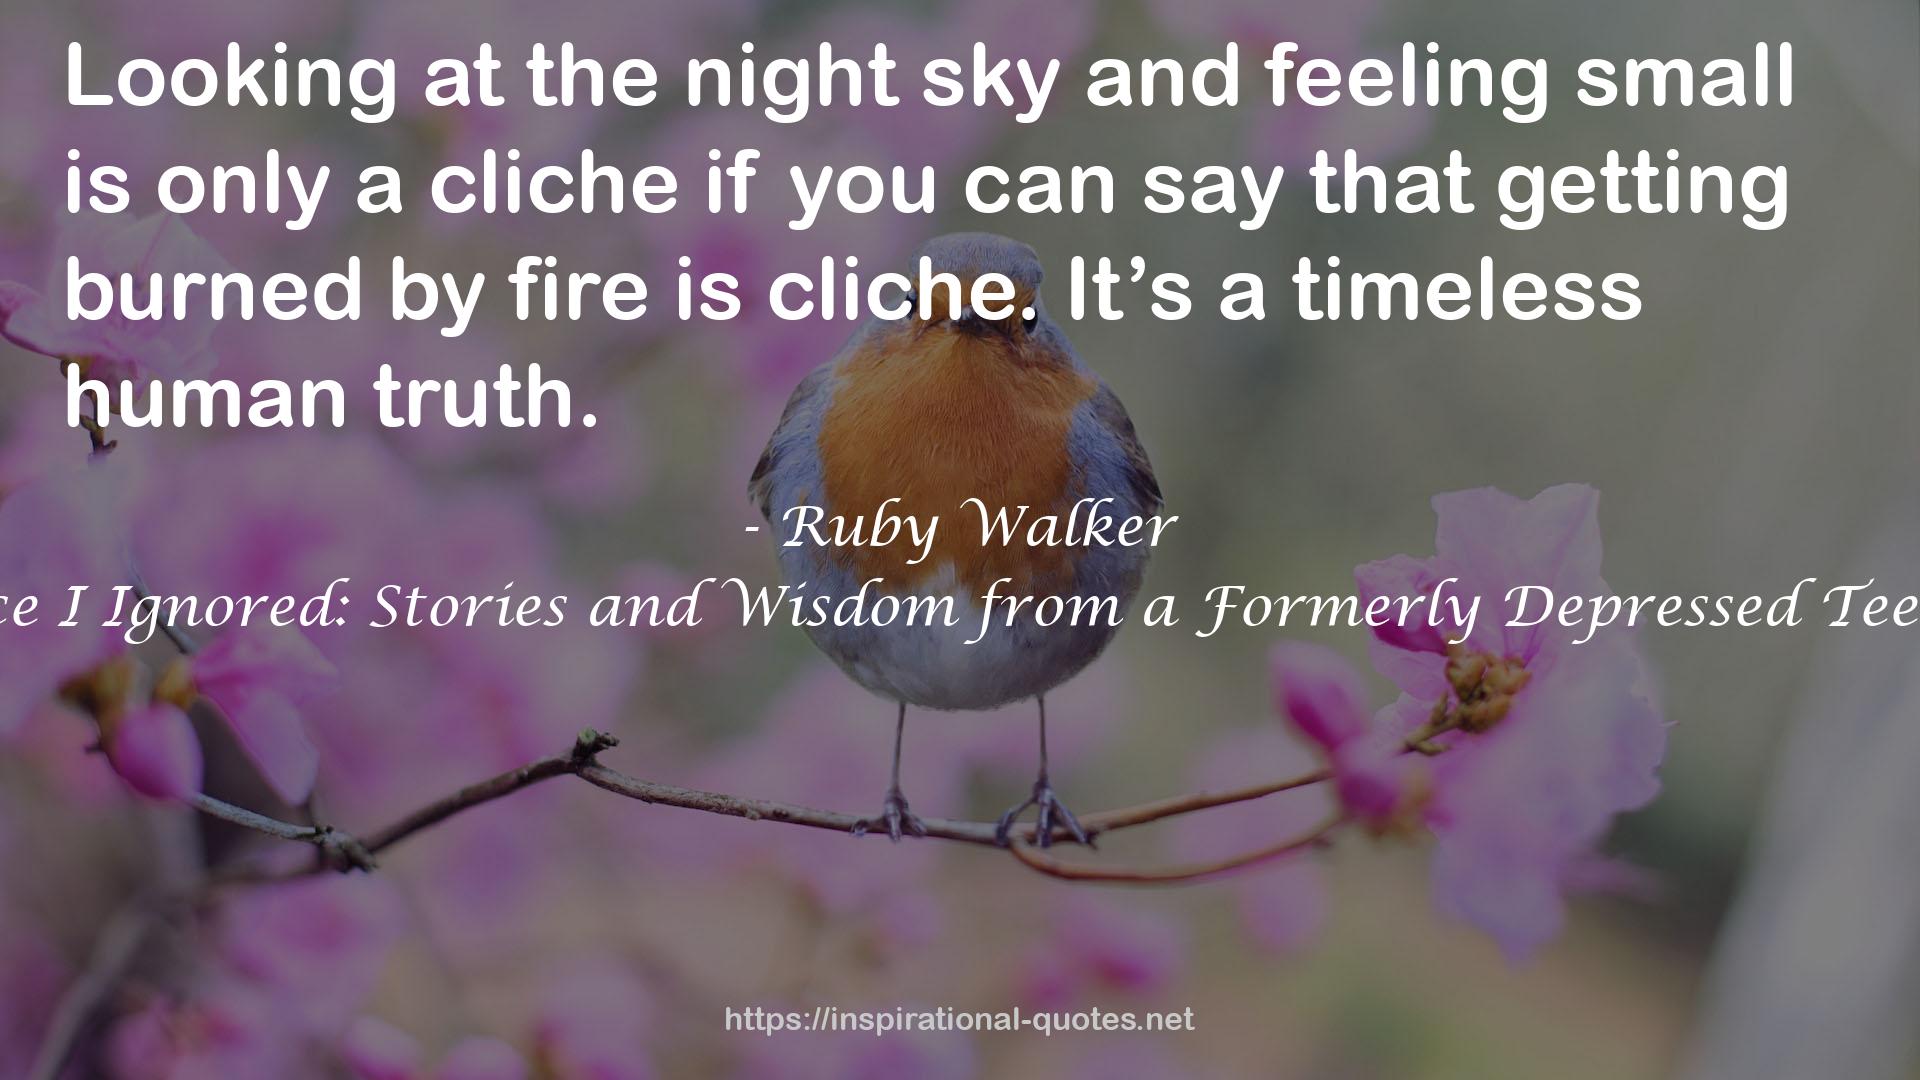 Ruby Walker QUOTES